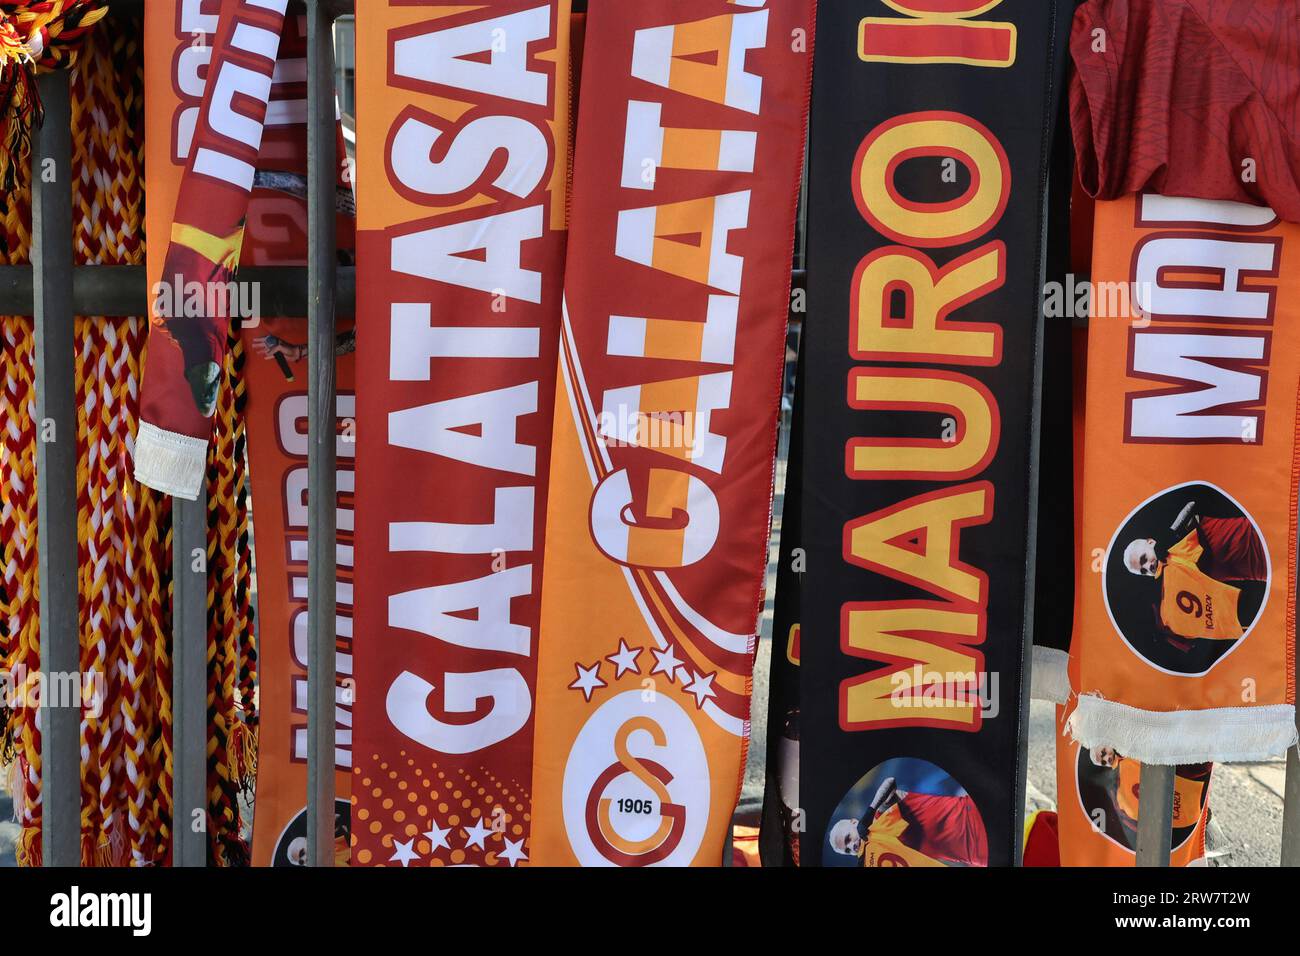 Galatasaray football scarves for sale at the Ali Sami Yen Sports Complex Rams Park football stadium (home of Galatasaray FC) in Istanbul Stock Photo